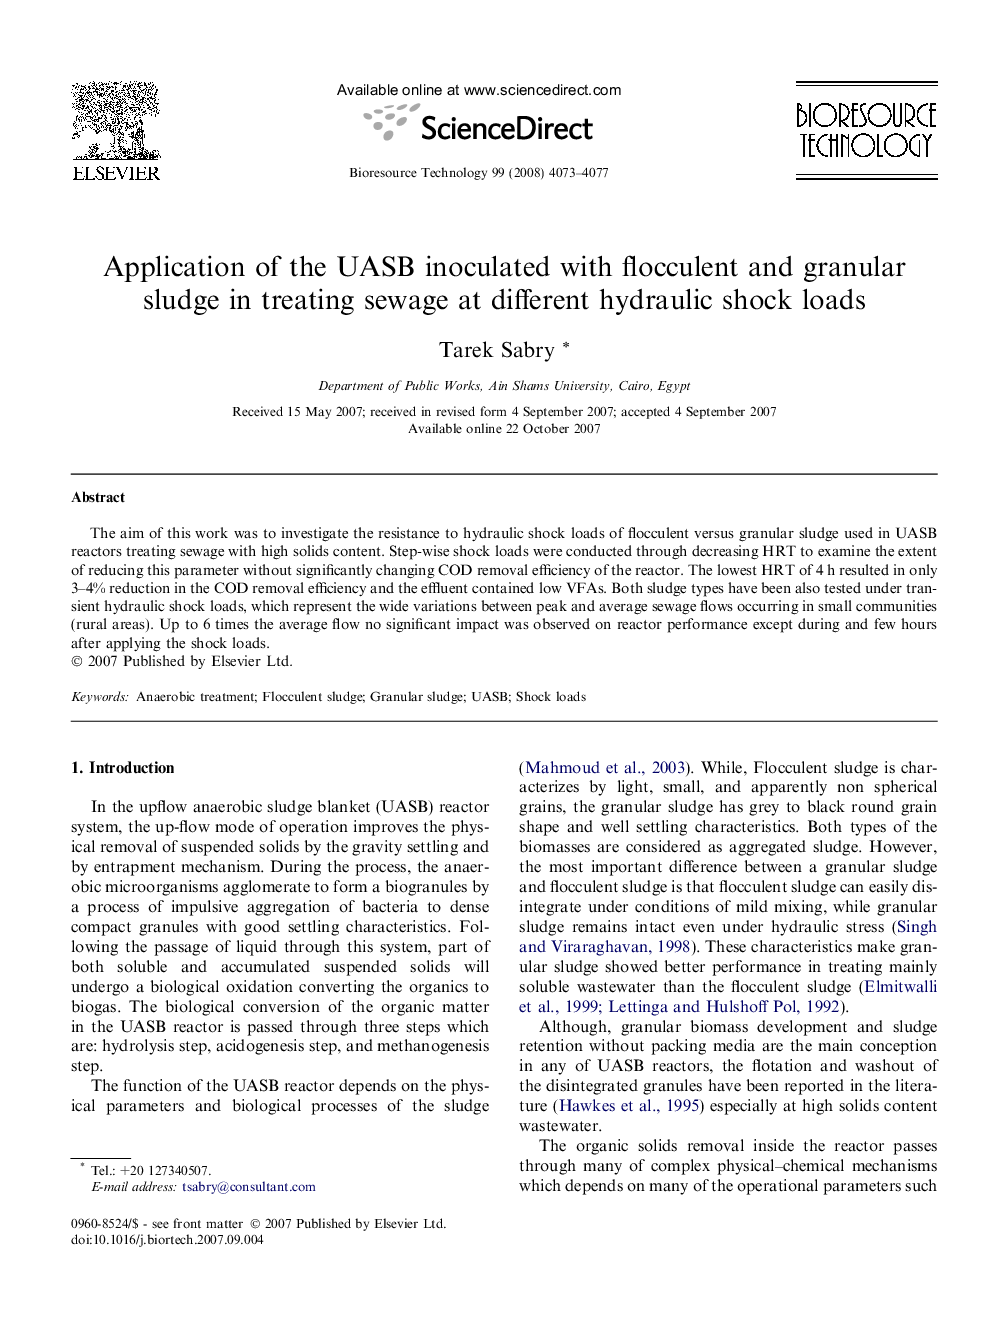 Application of the UASB inoculated with flocculent and granular sludge in treating sewage at different hydraulic shock loads